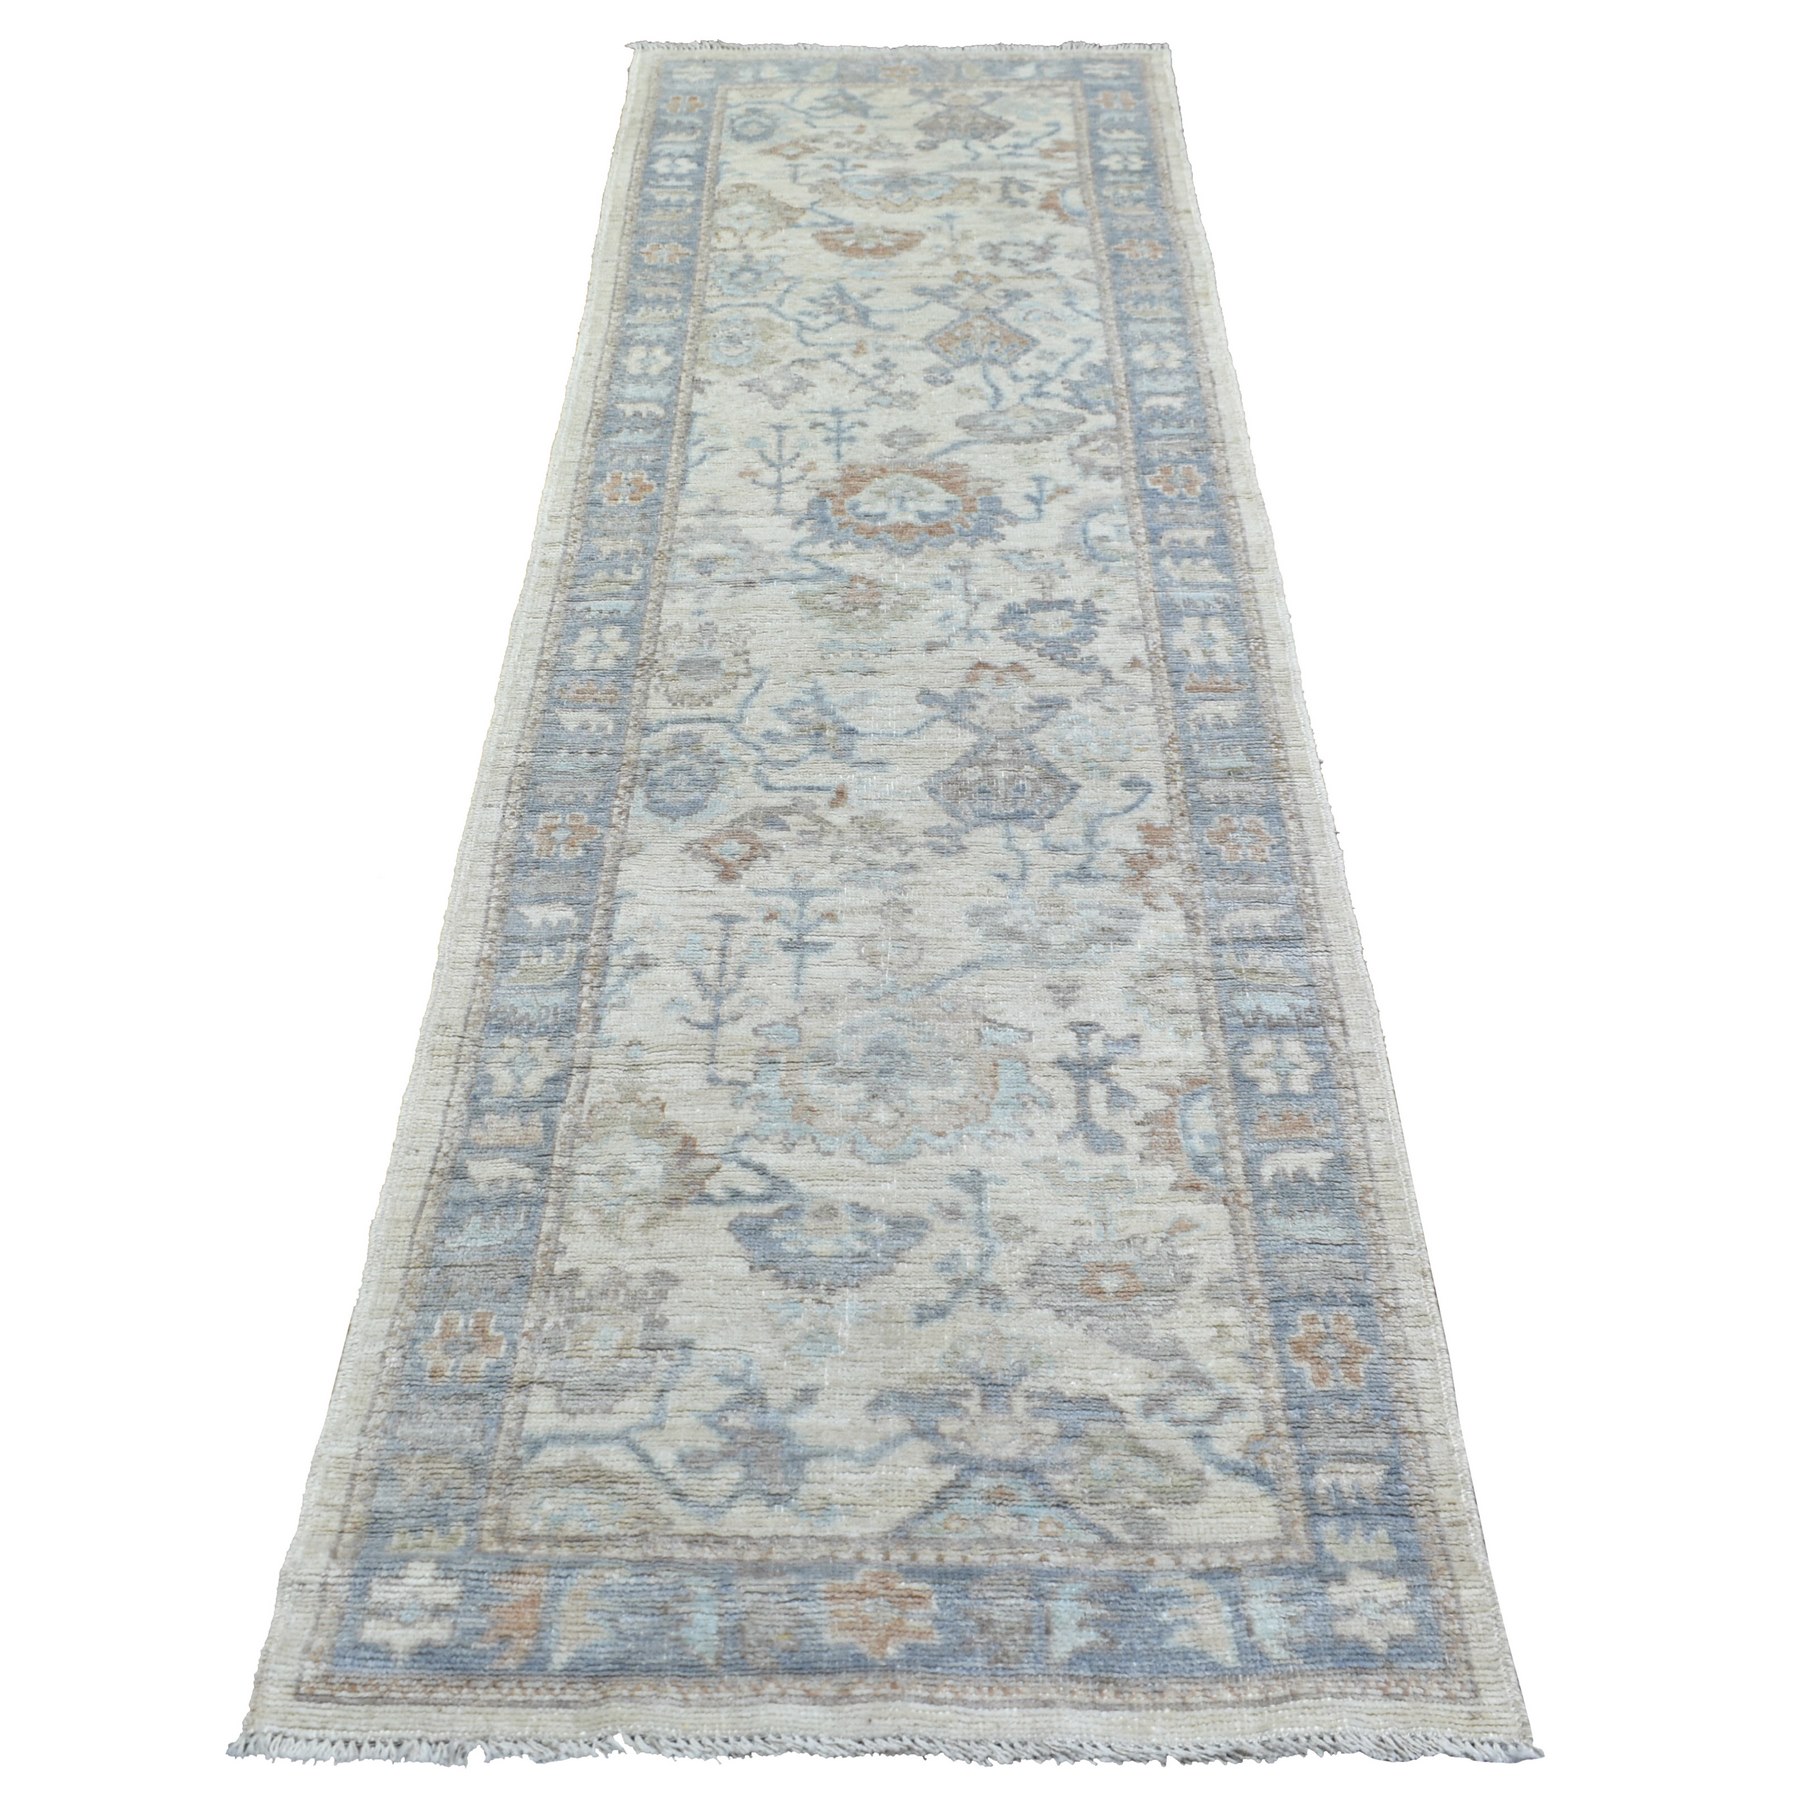 2'10"x9'5" Ivory Natural Dyes Angora Oushak With Colorful Leaf Design, Afghan Wool Hand Woven Runner Oriental Rug 